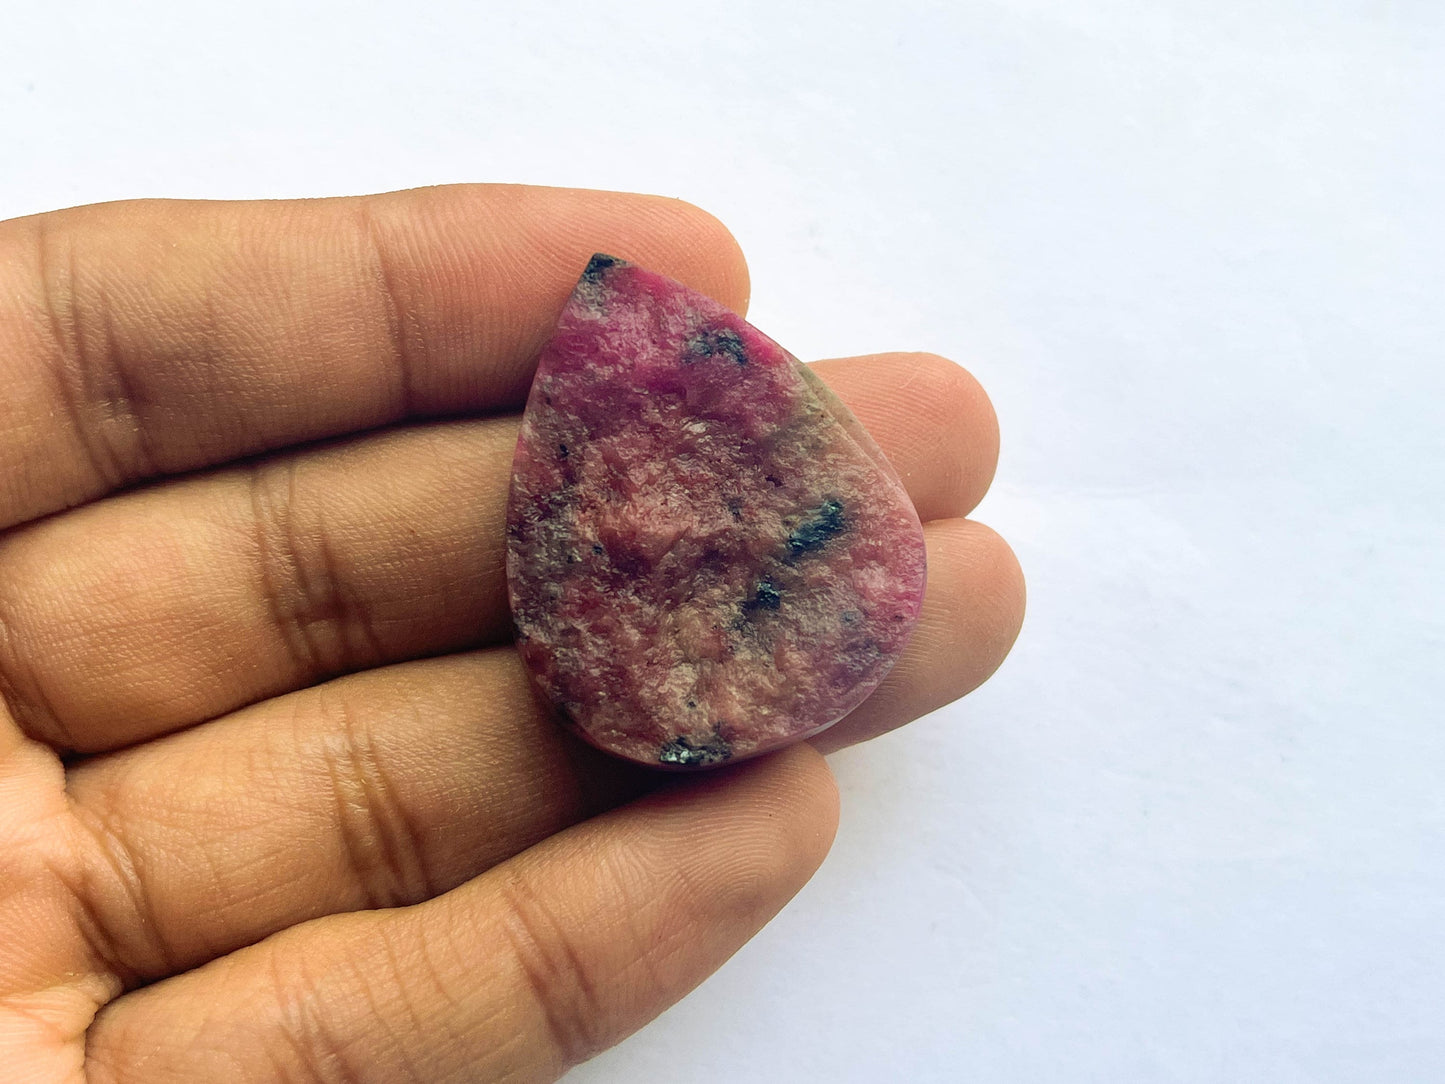 AAA Quality pink cobalto calcite Druzy Cabochons, Natural pink cobalto Druzy Cabochons, Top Quality handmade Cabochons 100%Natural BFYJ107-3 Beadsforyourjewelry